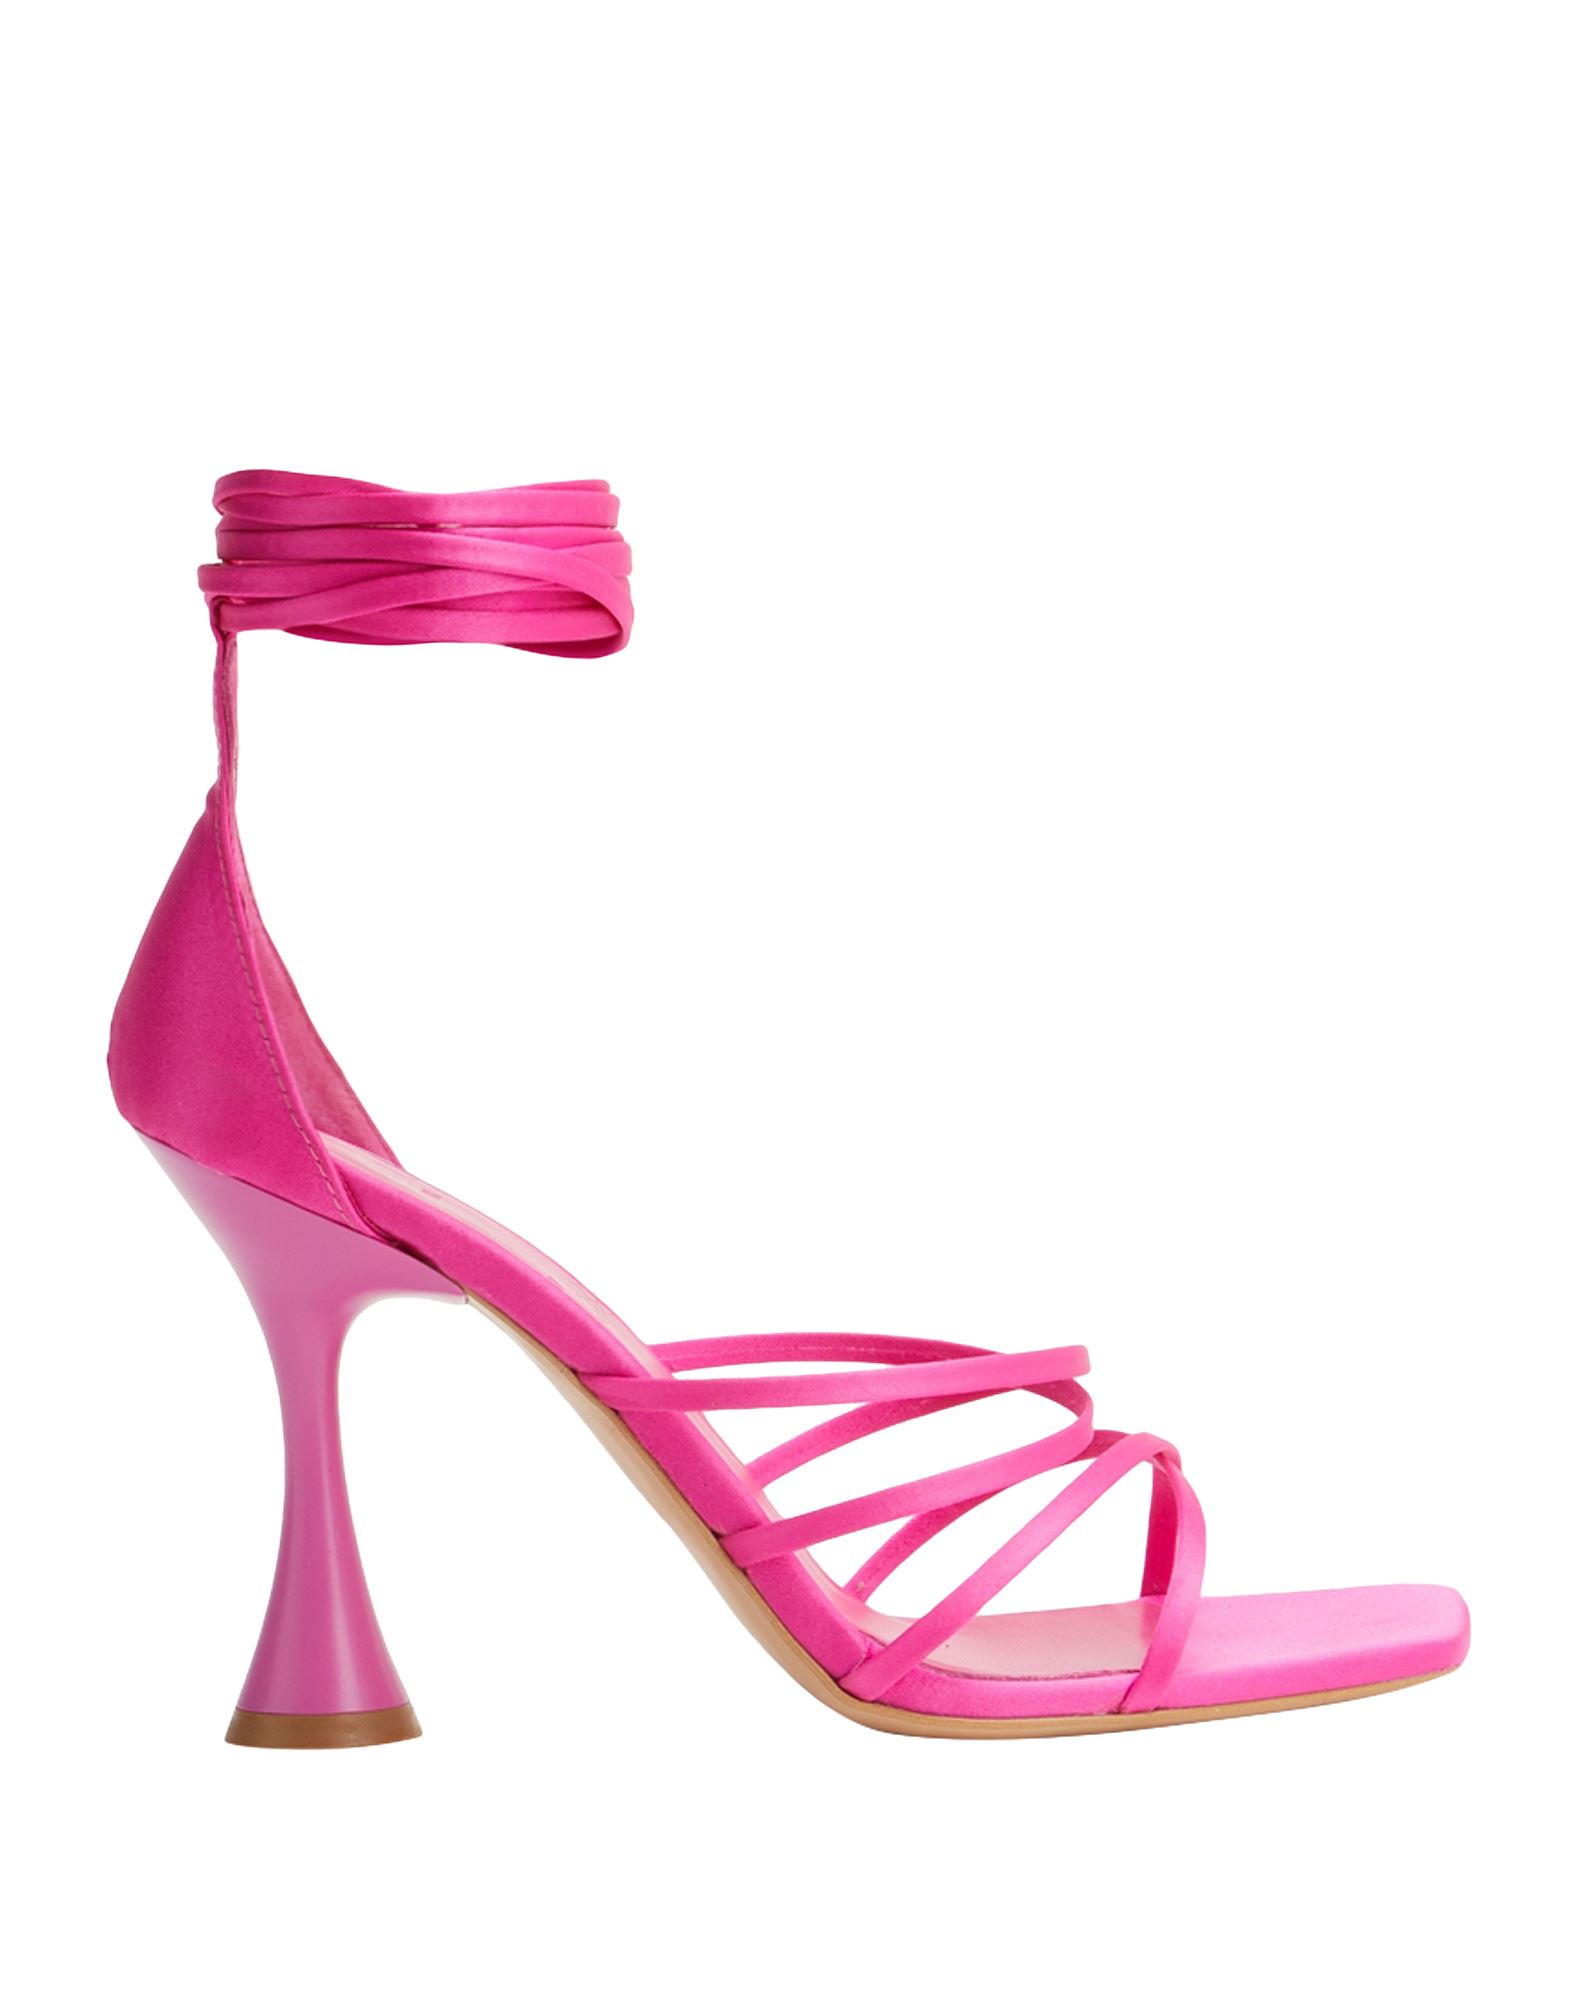 8 By Yoox Sandals In Magenta